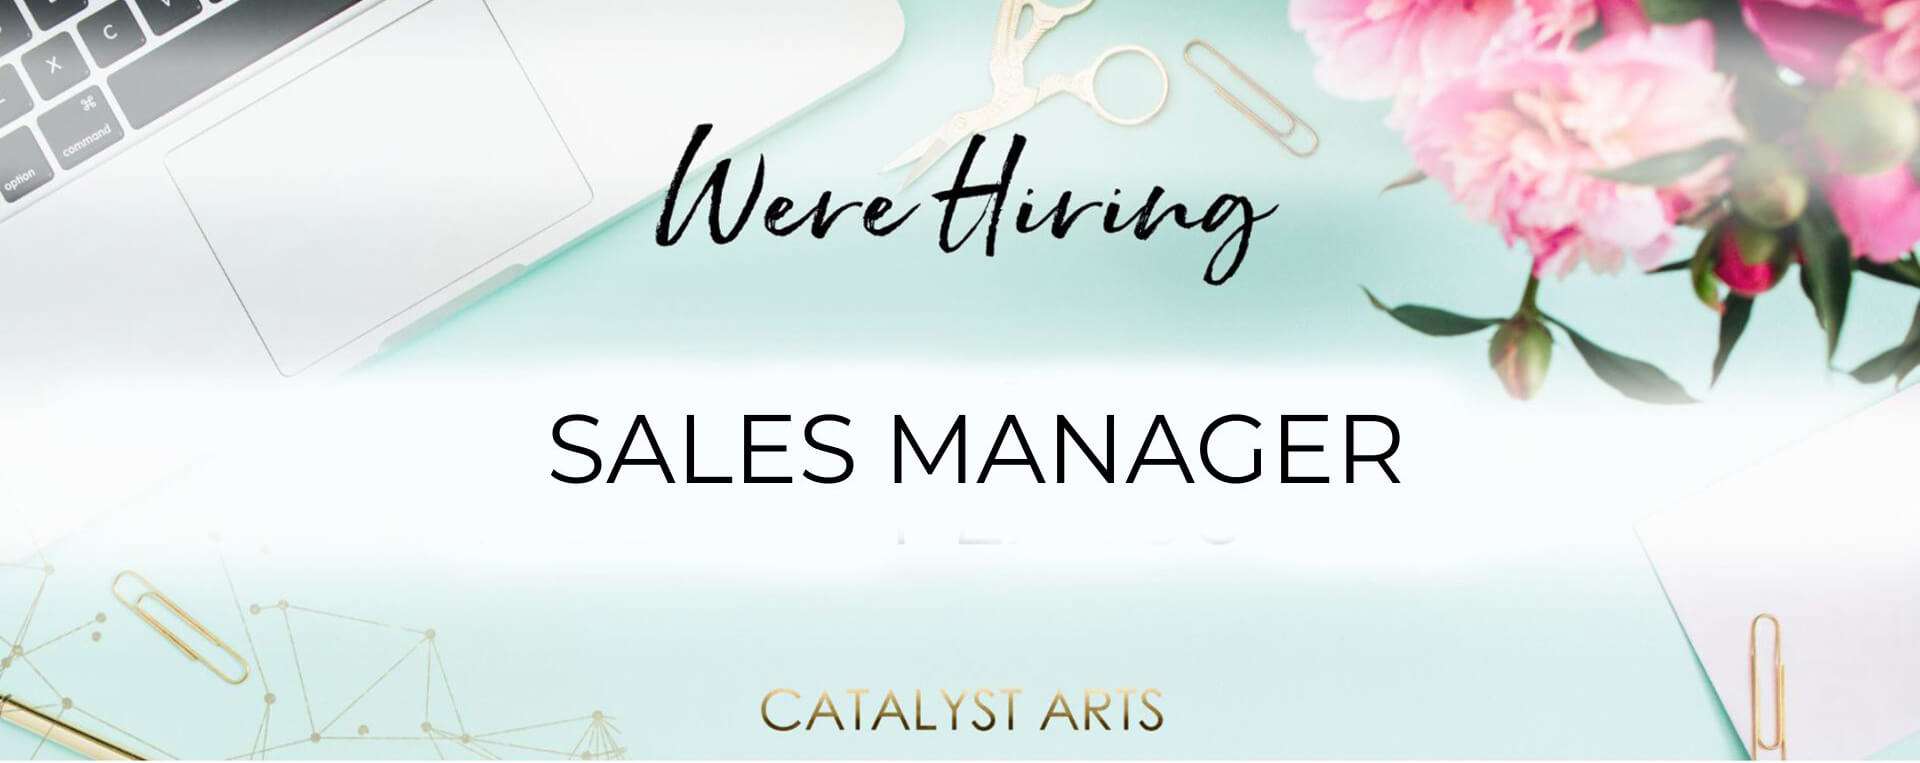 Hiring Sales Manager for events entertainment company California 